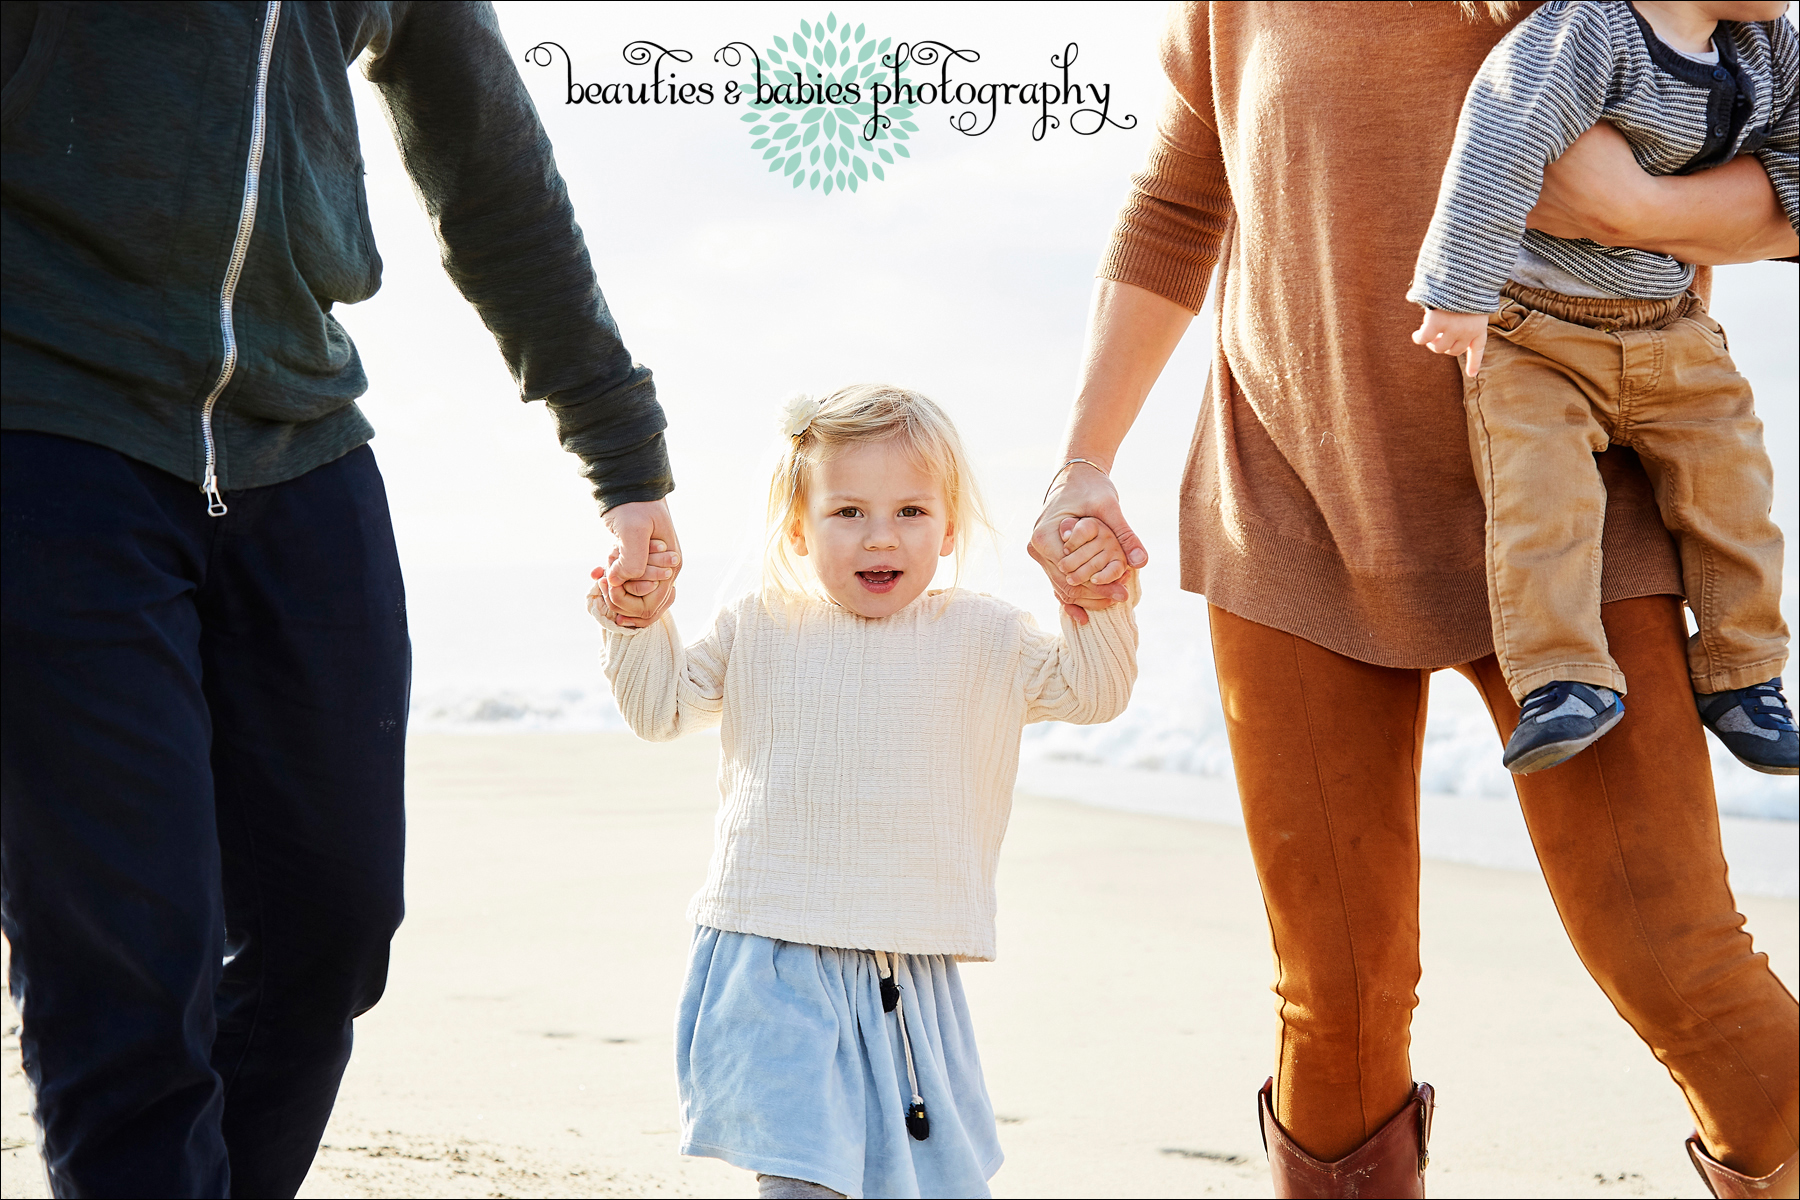 toddler play photography, kids and family photographer los angeles, Baby Photographer Los Angeles photography, Professional family portrait photographer Los Angeles, Santa Monica Beach photography Los Angeles photographer, chidlrens photographer Los Angeles